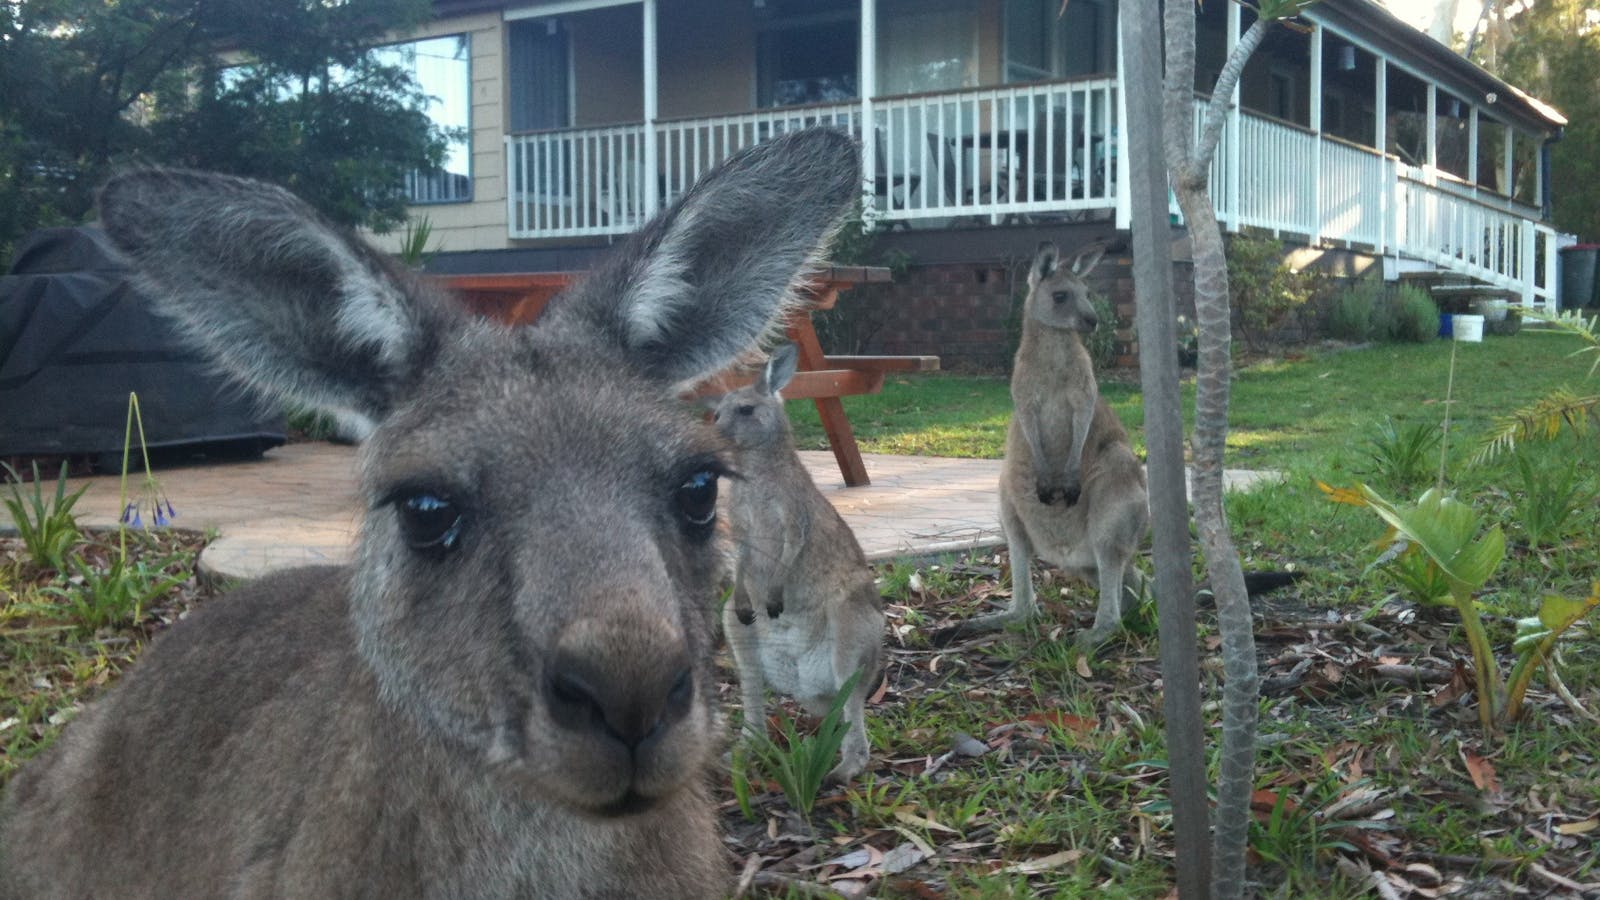 Kangaroos frequent the town and often pop in for a feed.